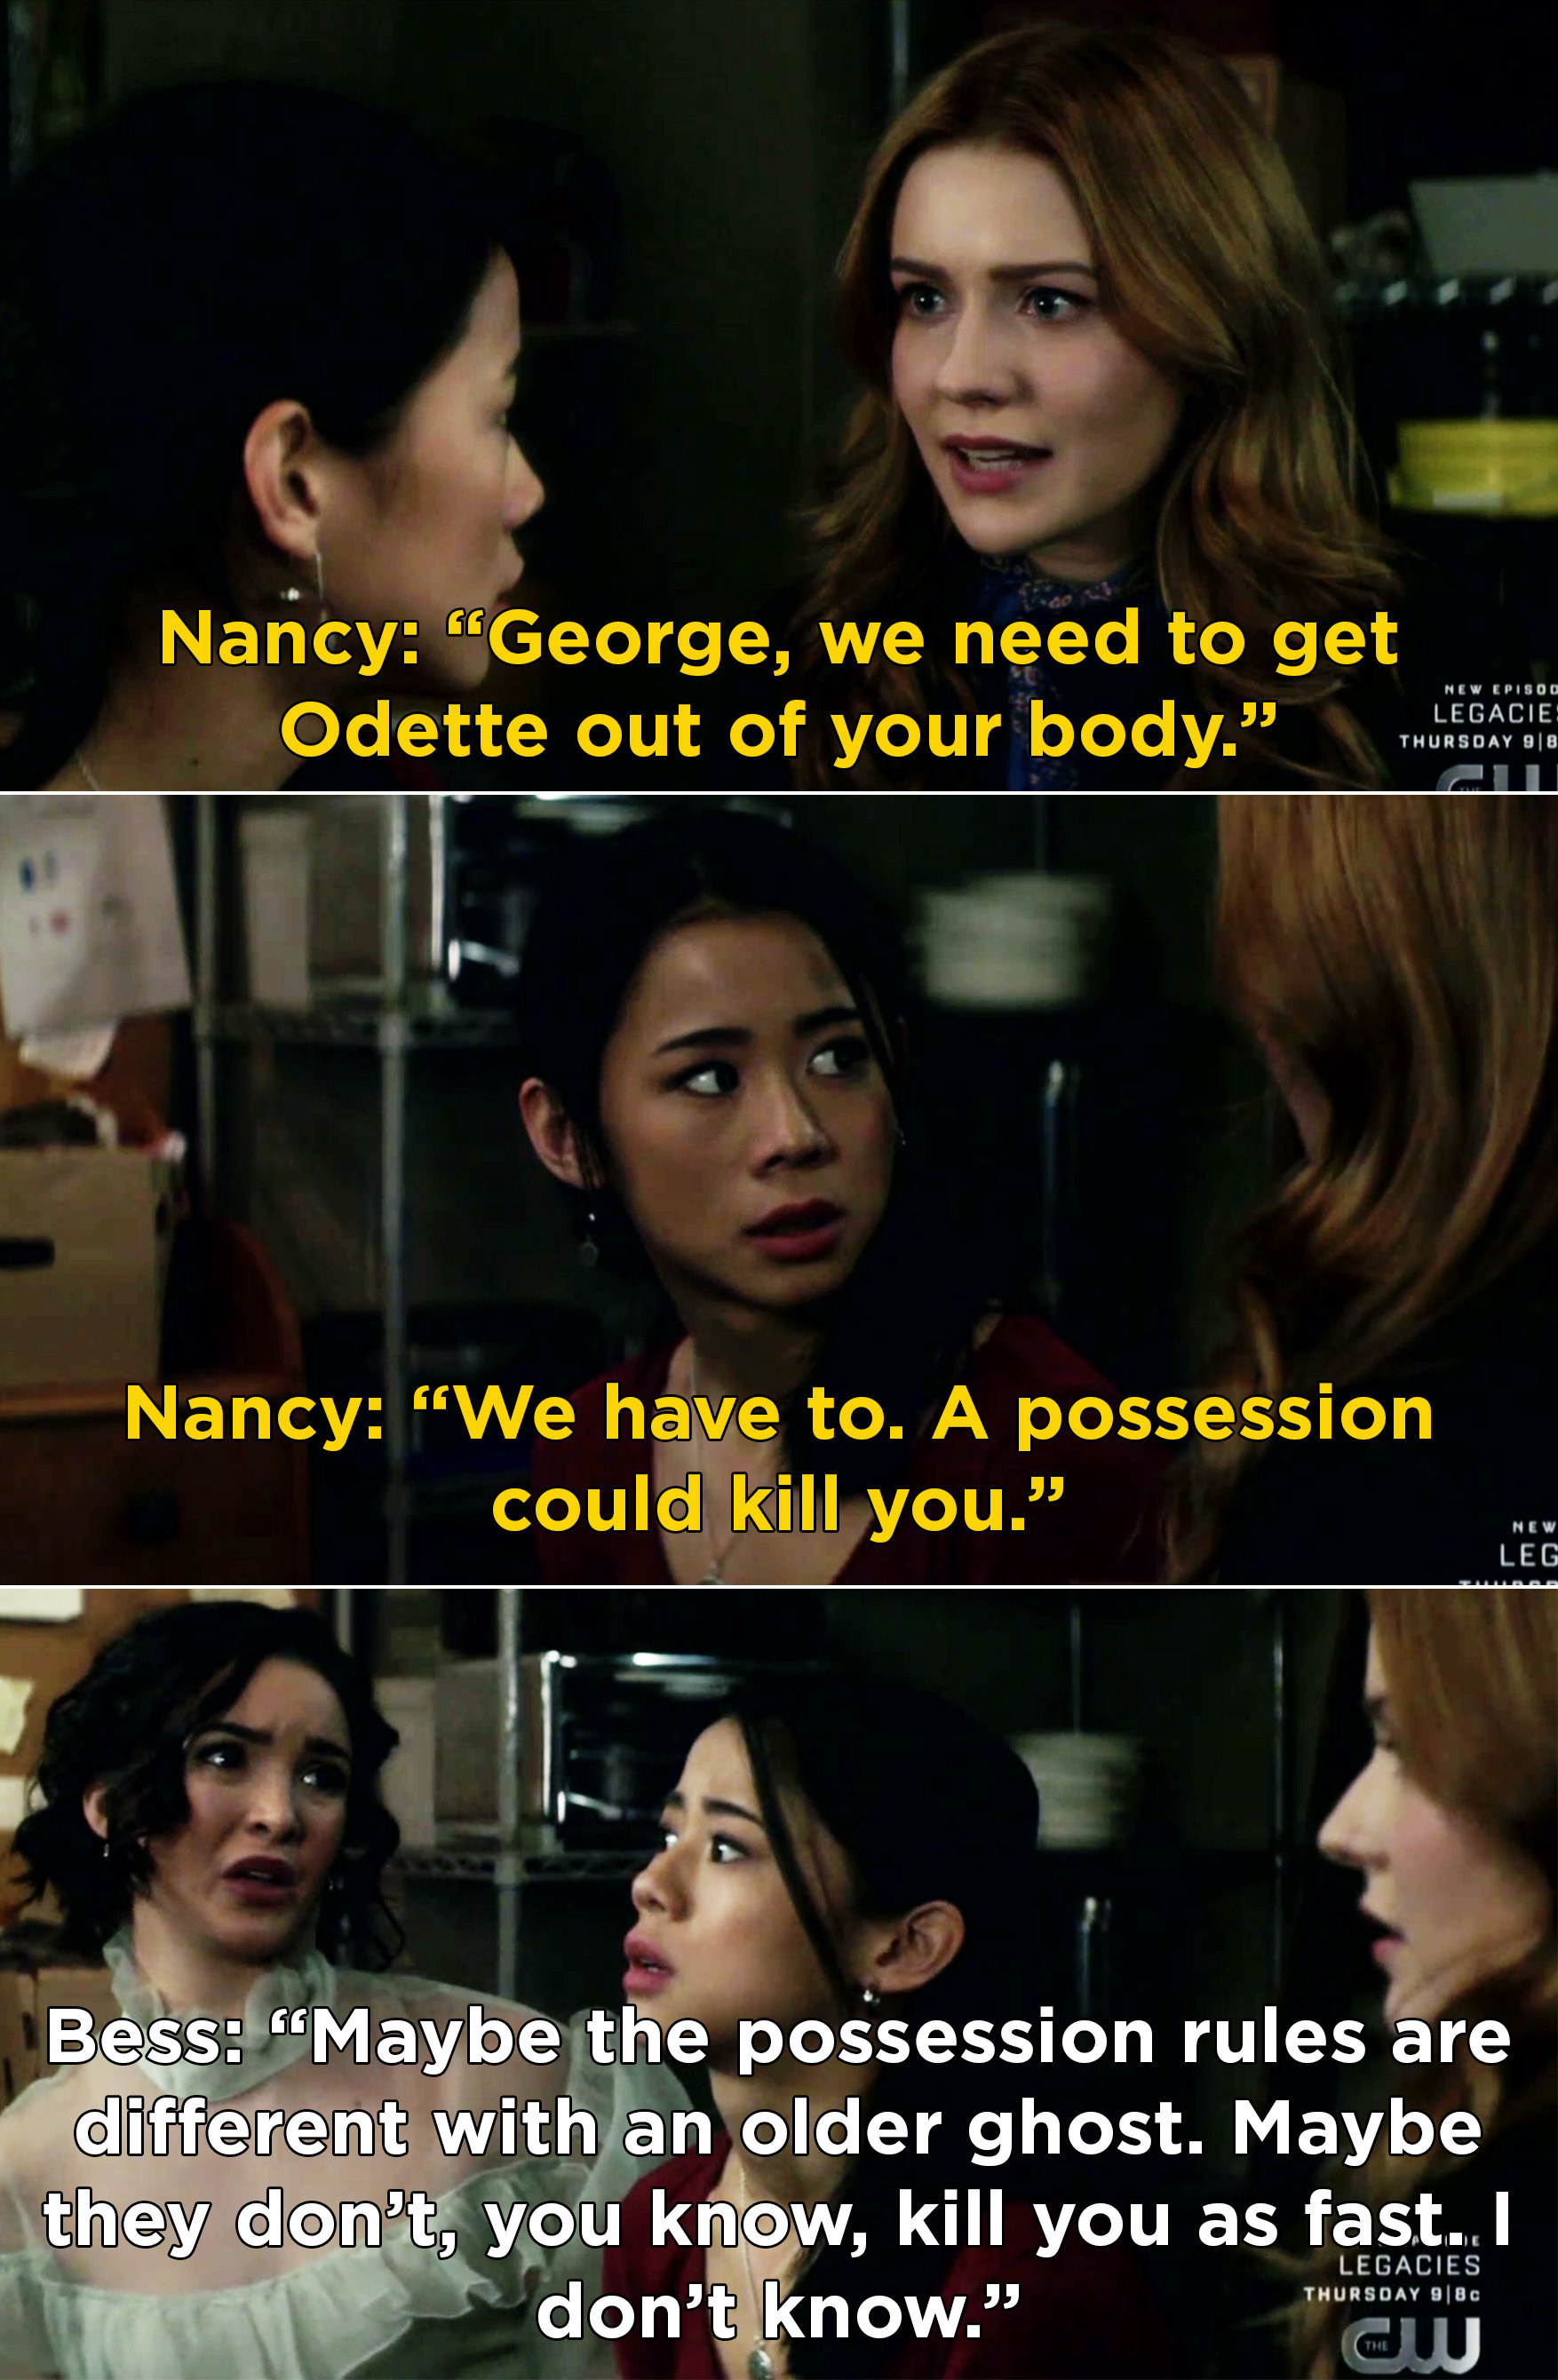 Nancy telling George that they need to get Odette out of her body because a possession could kill her